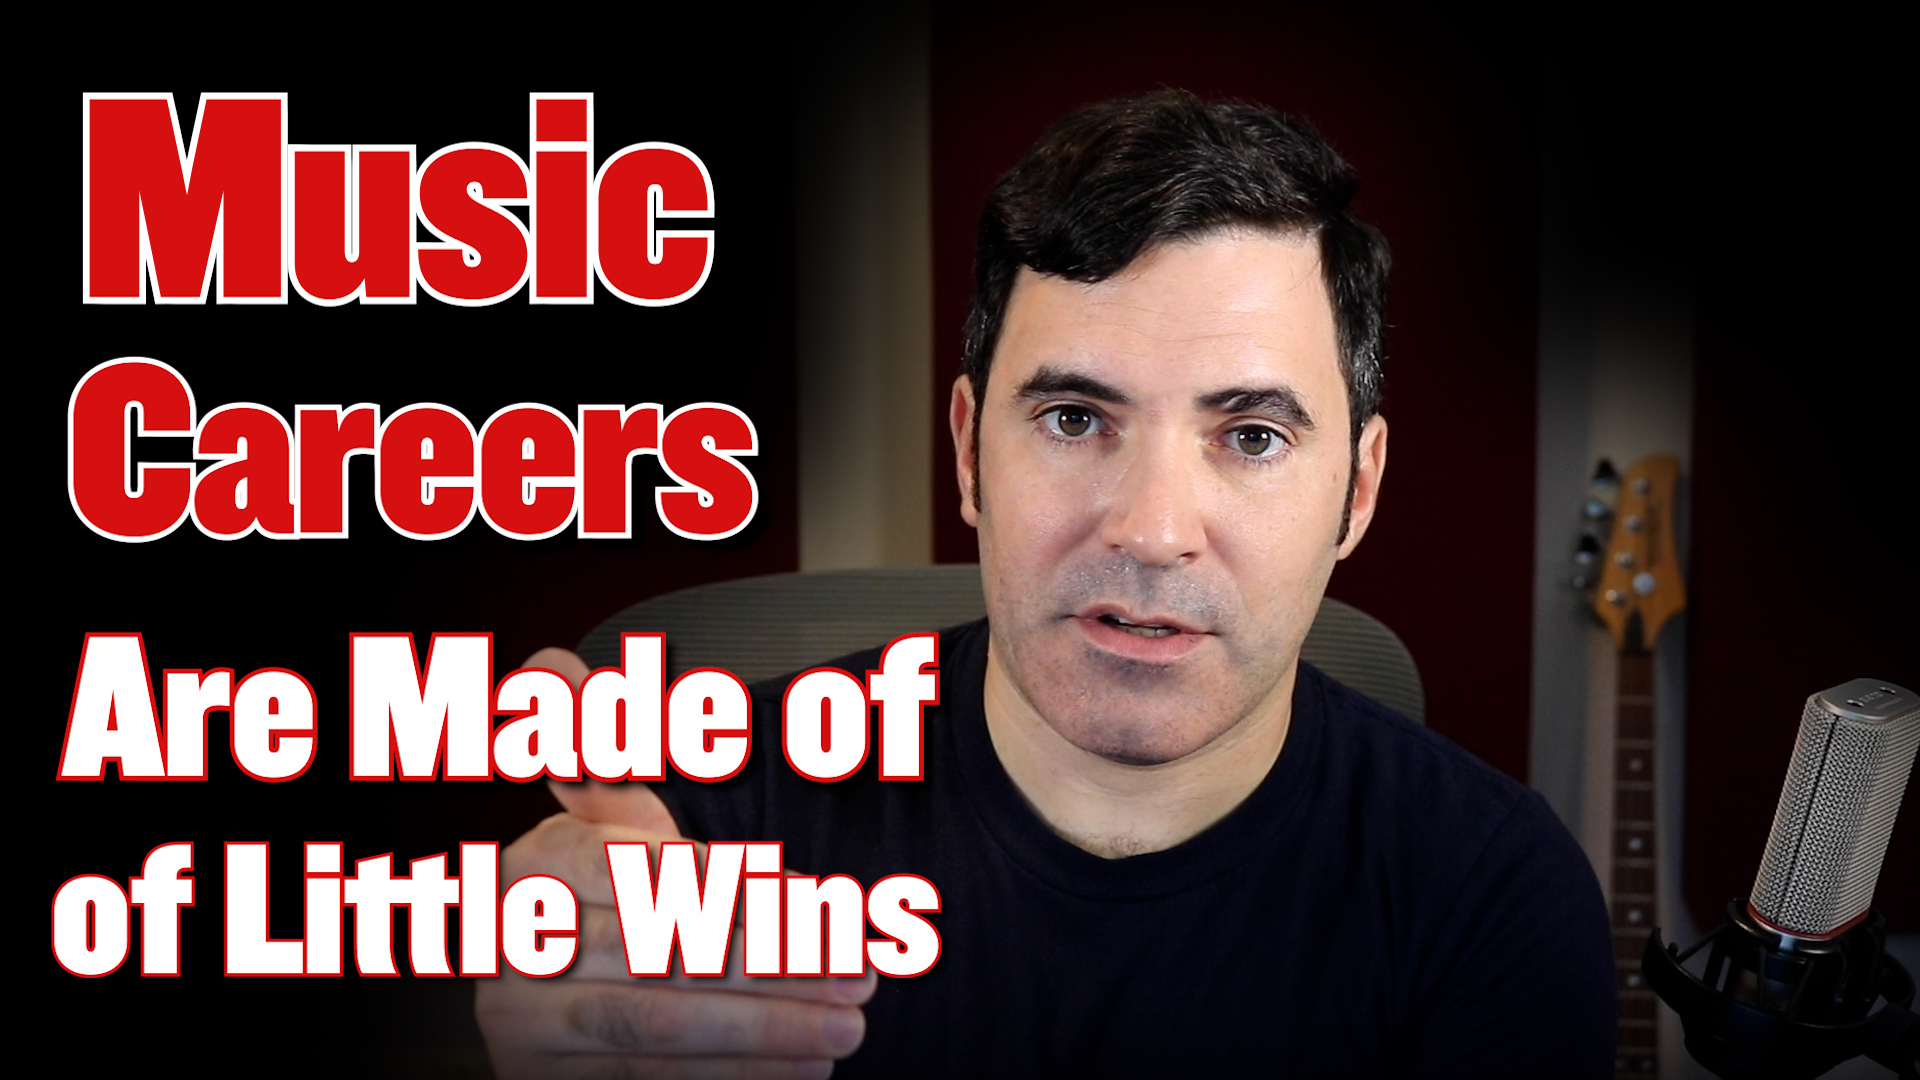 For a Career in Music, You Need Lots of Little Wins